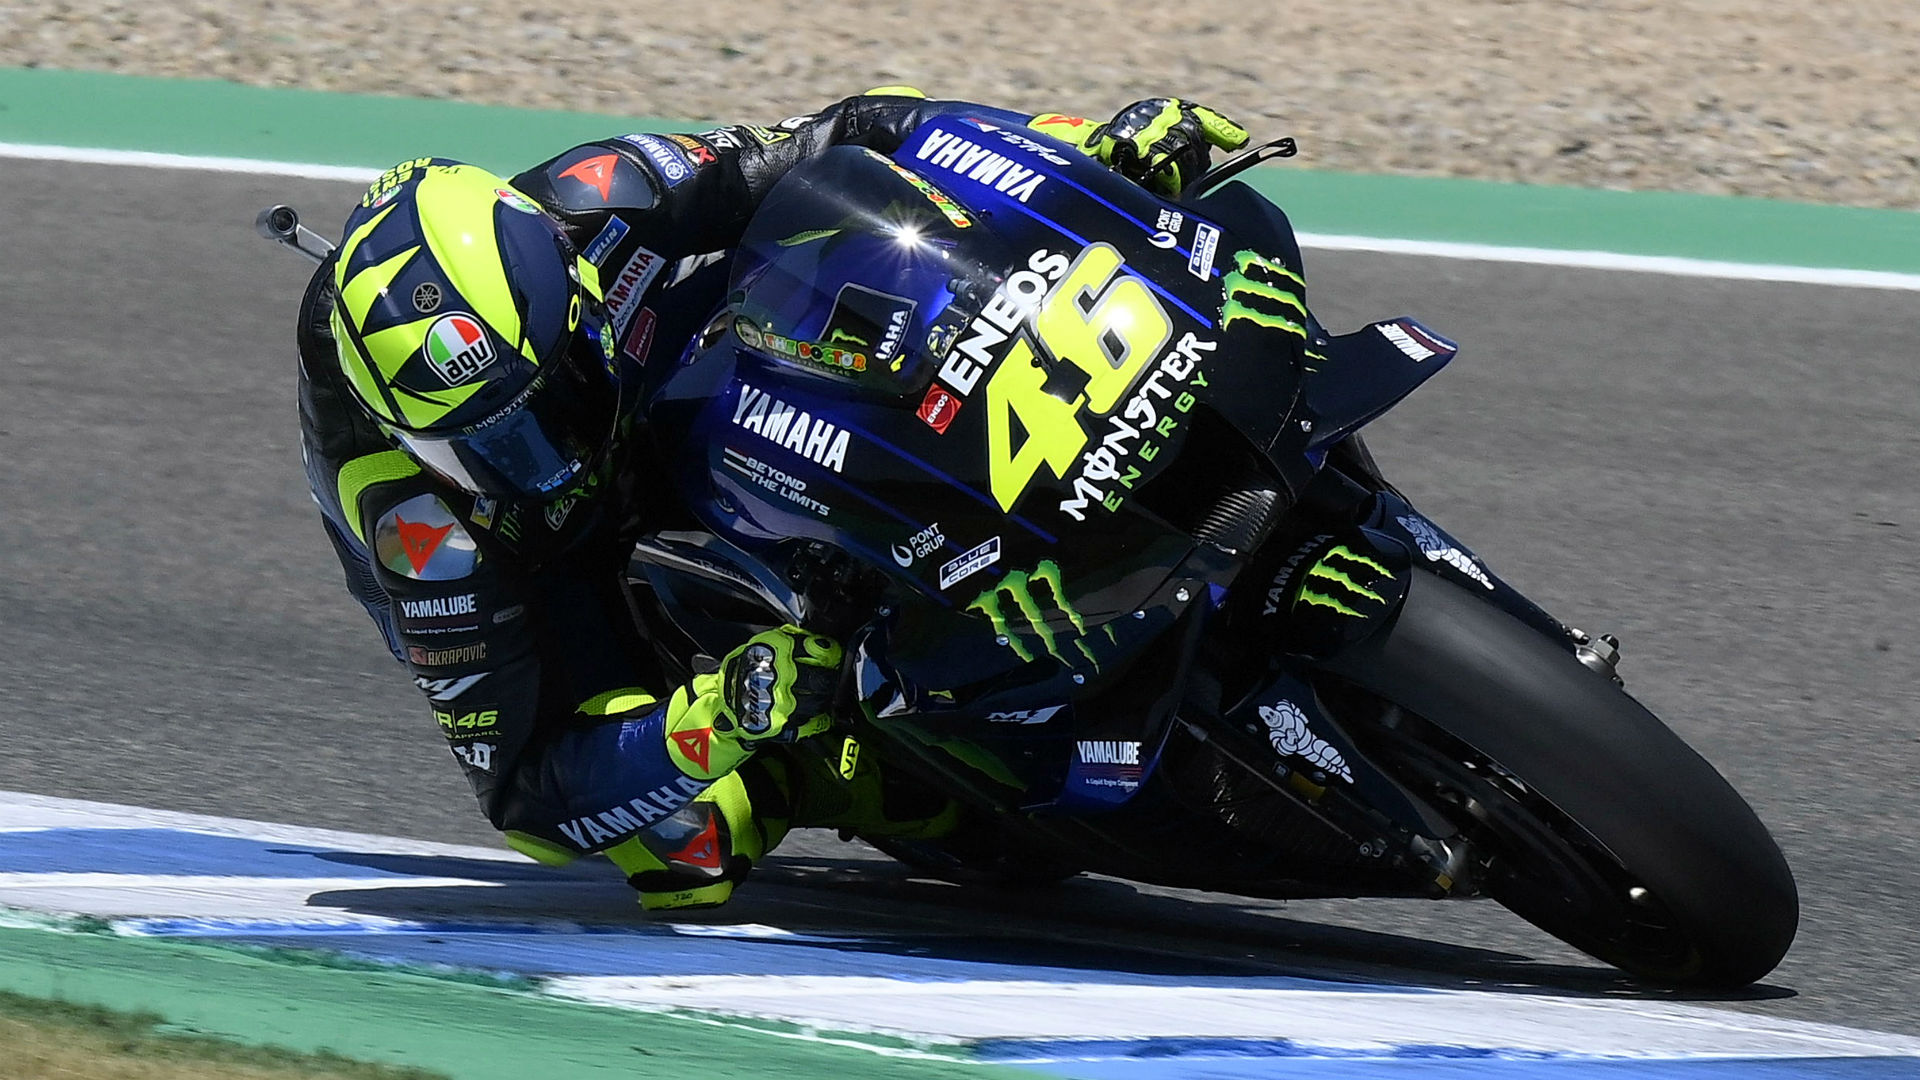 A poor start to the season left Valentino Rossi lacking in motivation, but changes to his Yamaha paid off on Sunday.